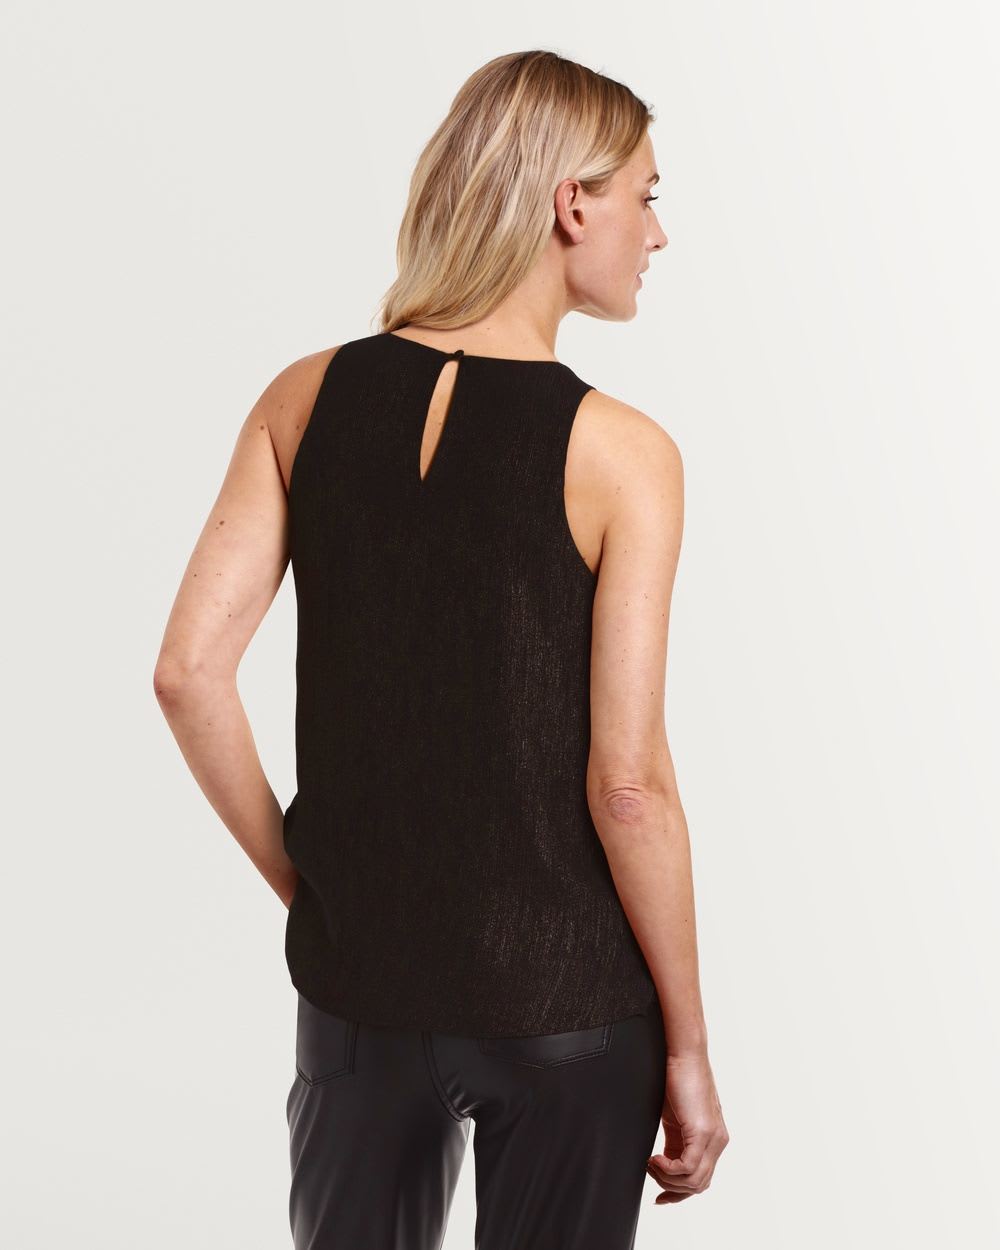 Shimmering Sleeveless Top with Keyhole Details